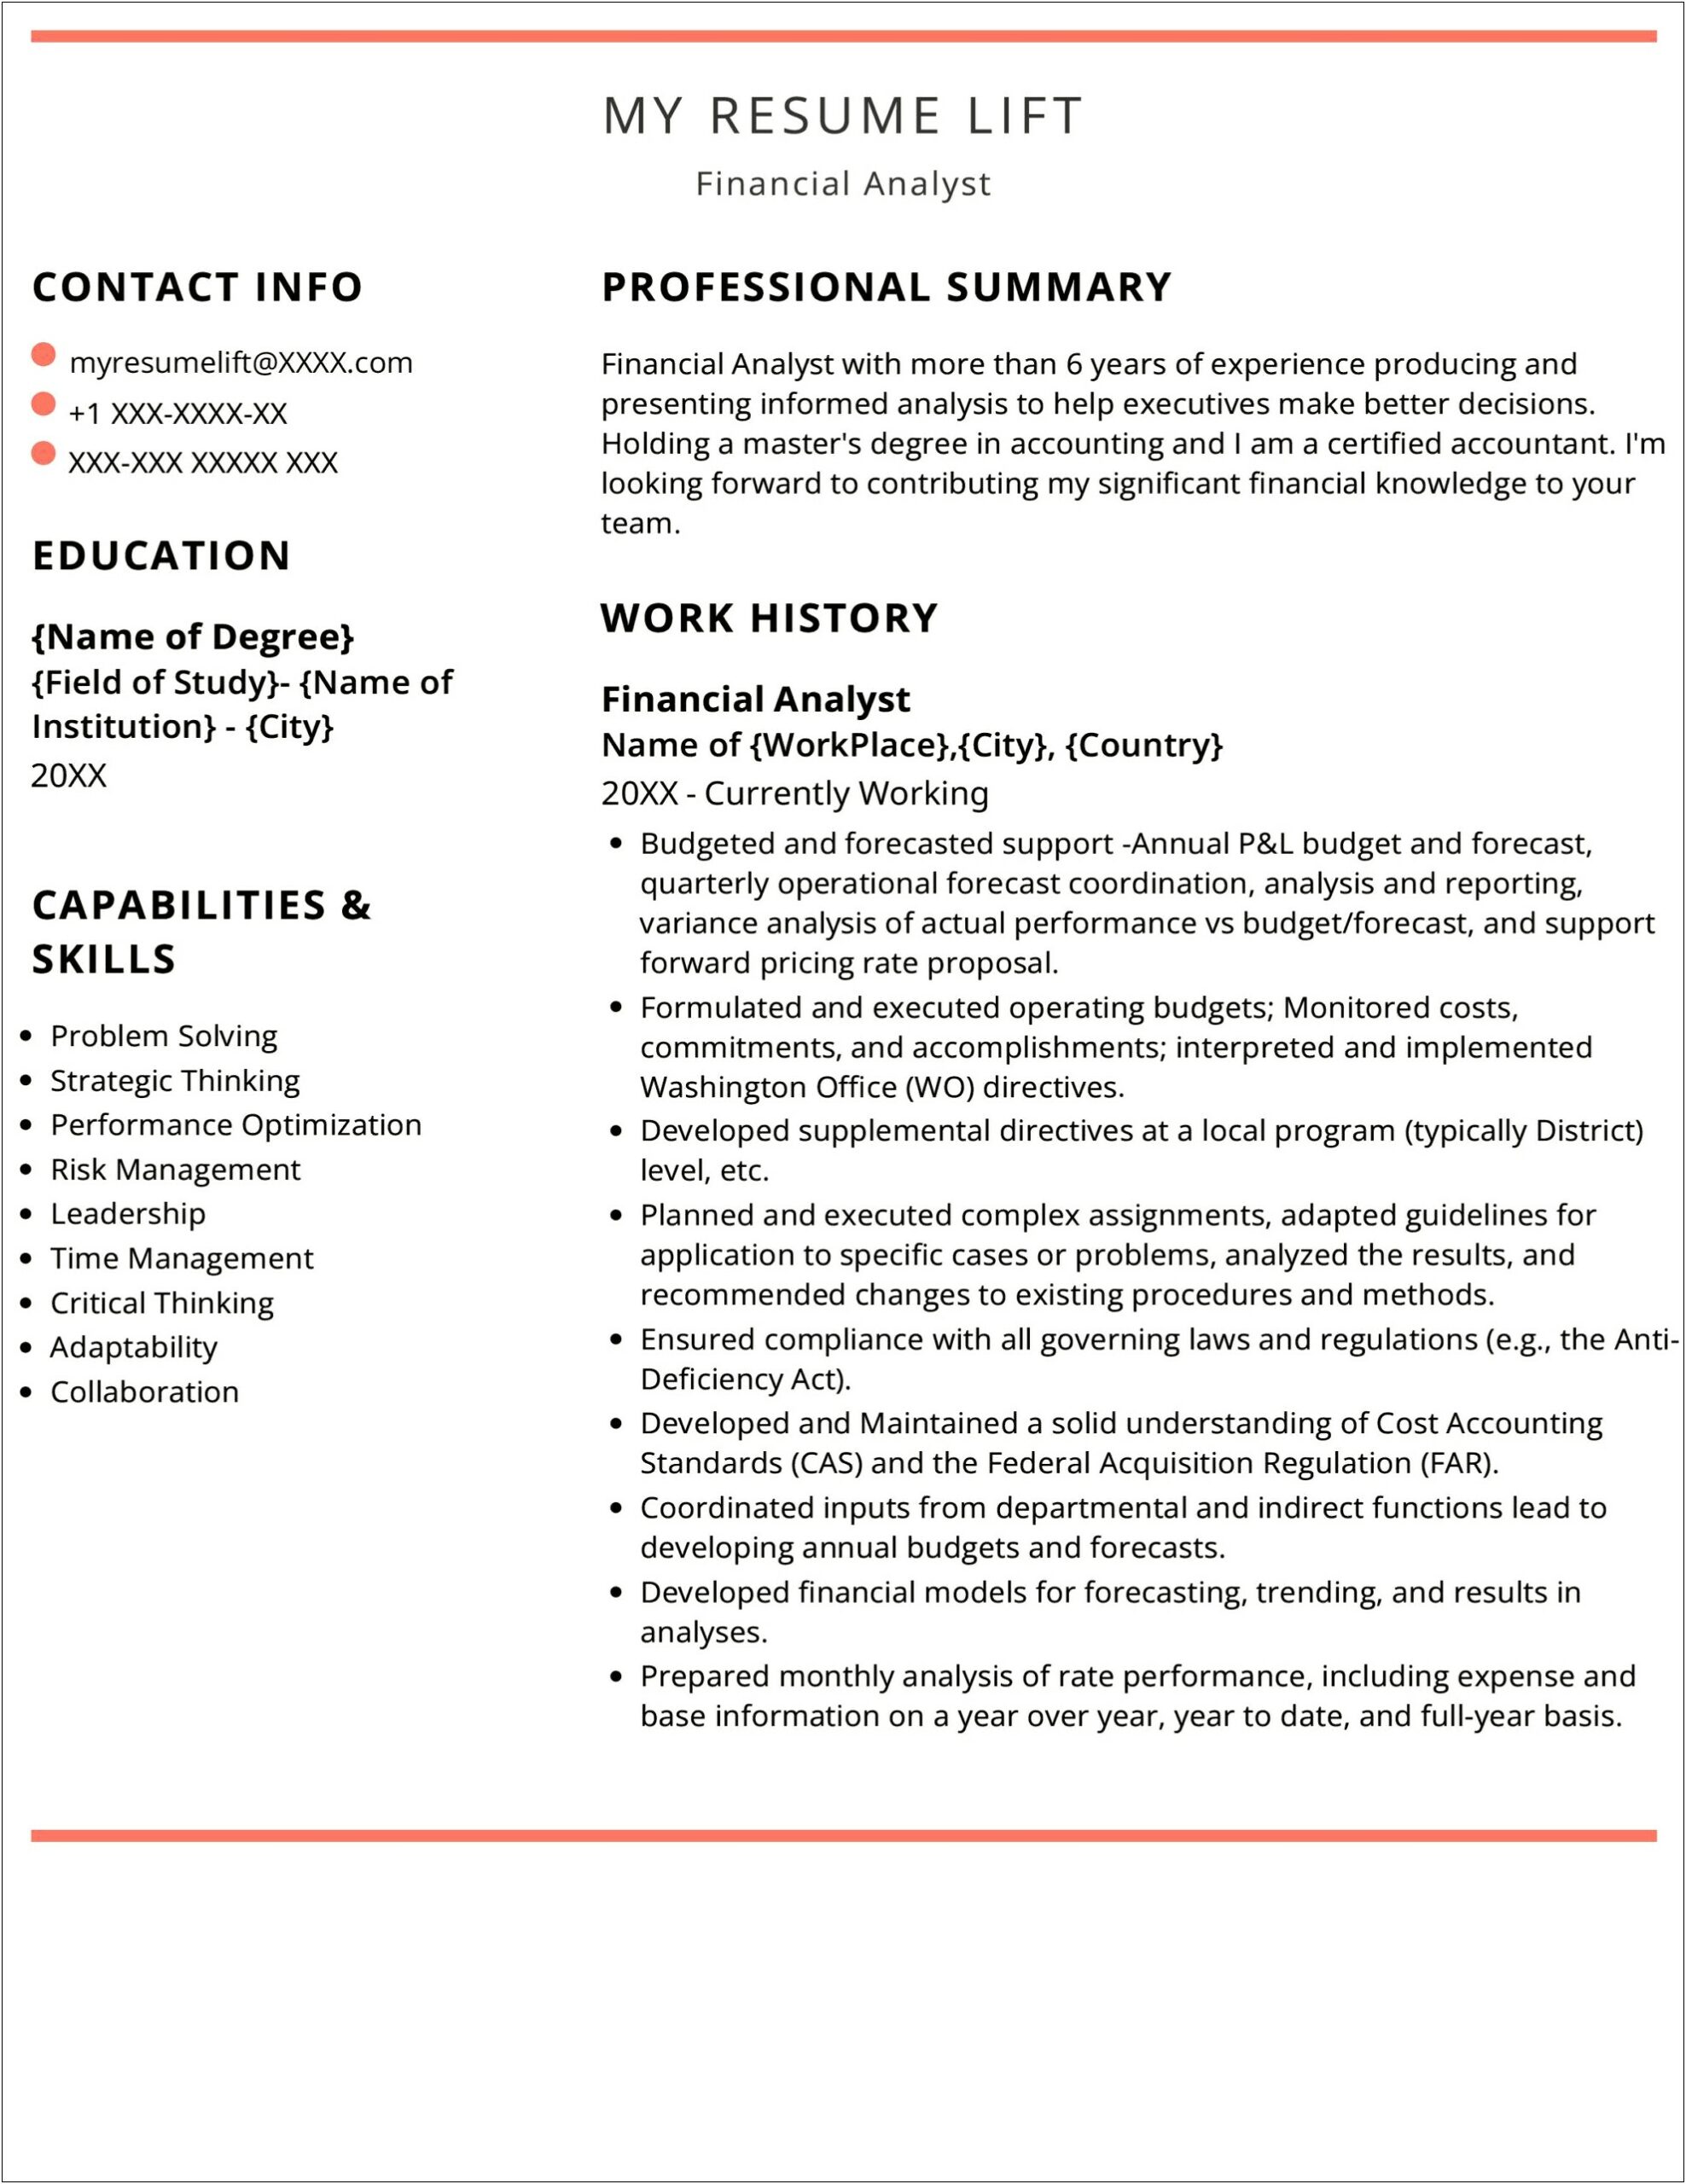 Example Of Resume For Financial Analyst